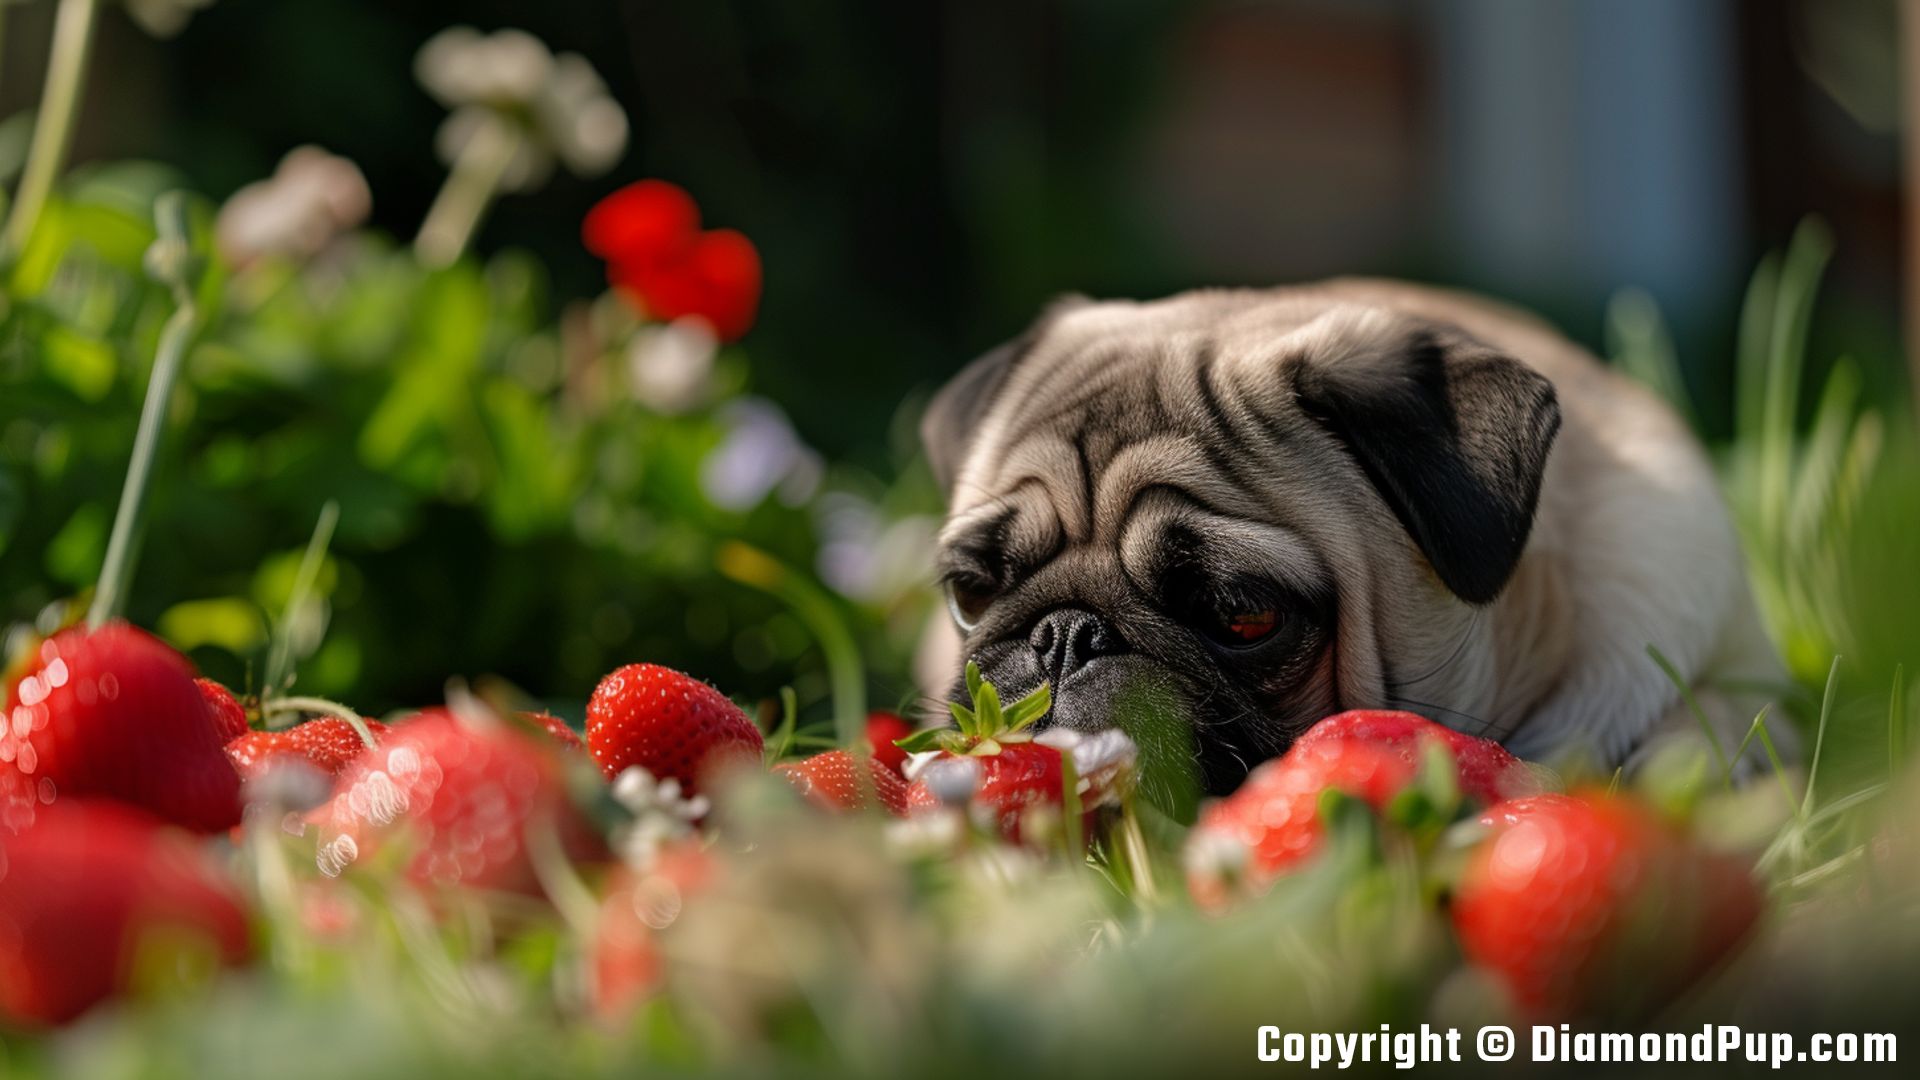 Image of a Cute Pug Eating Strawberries